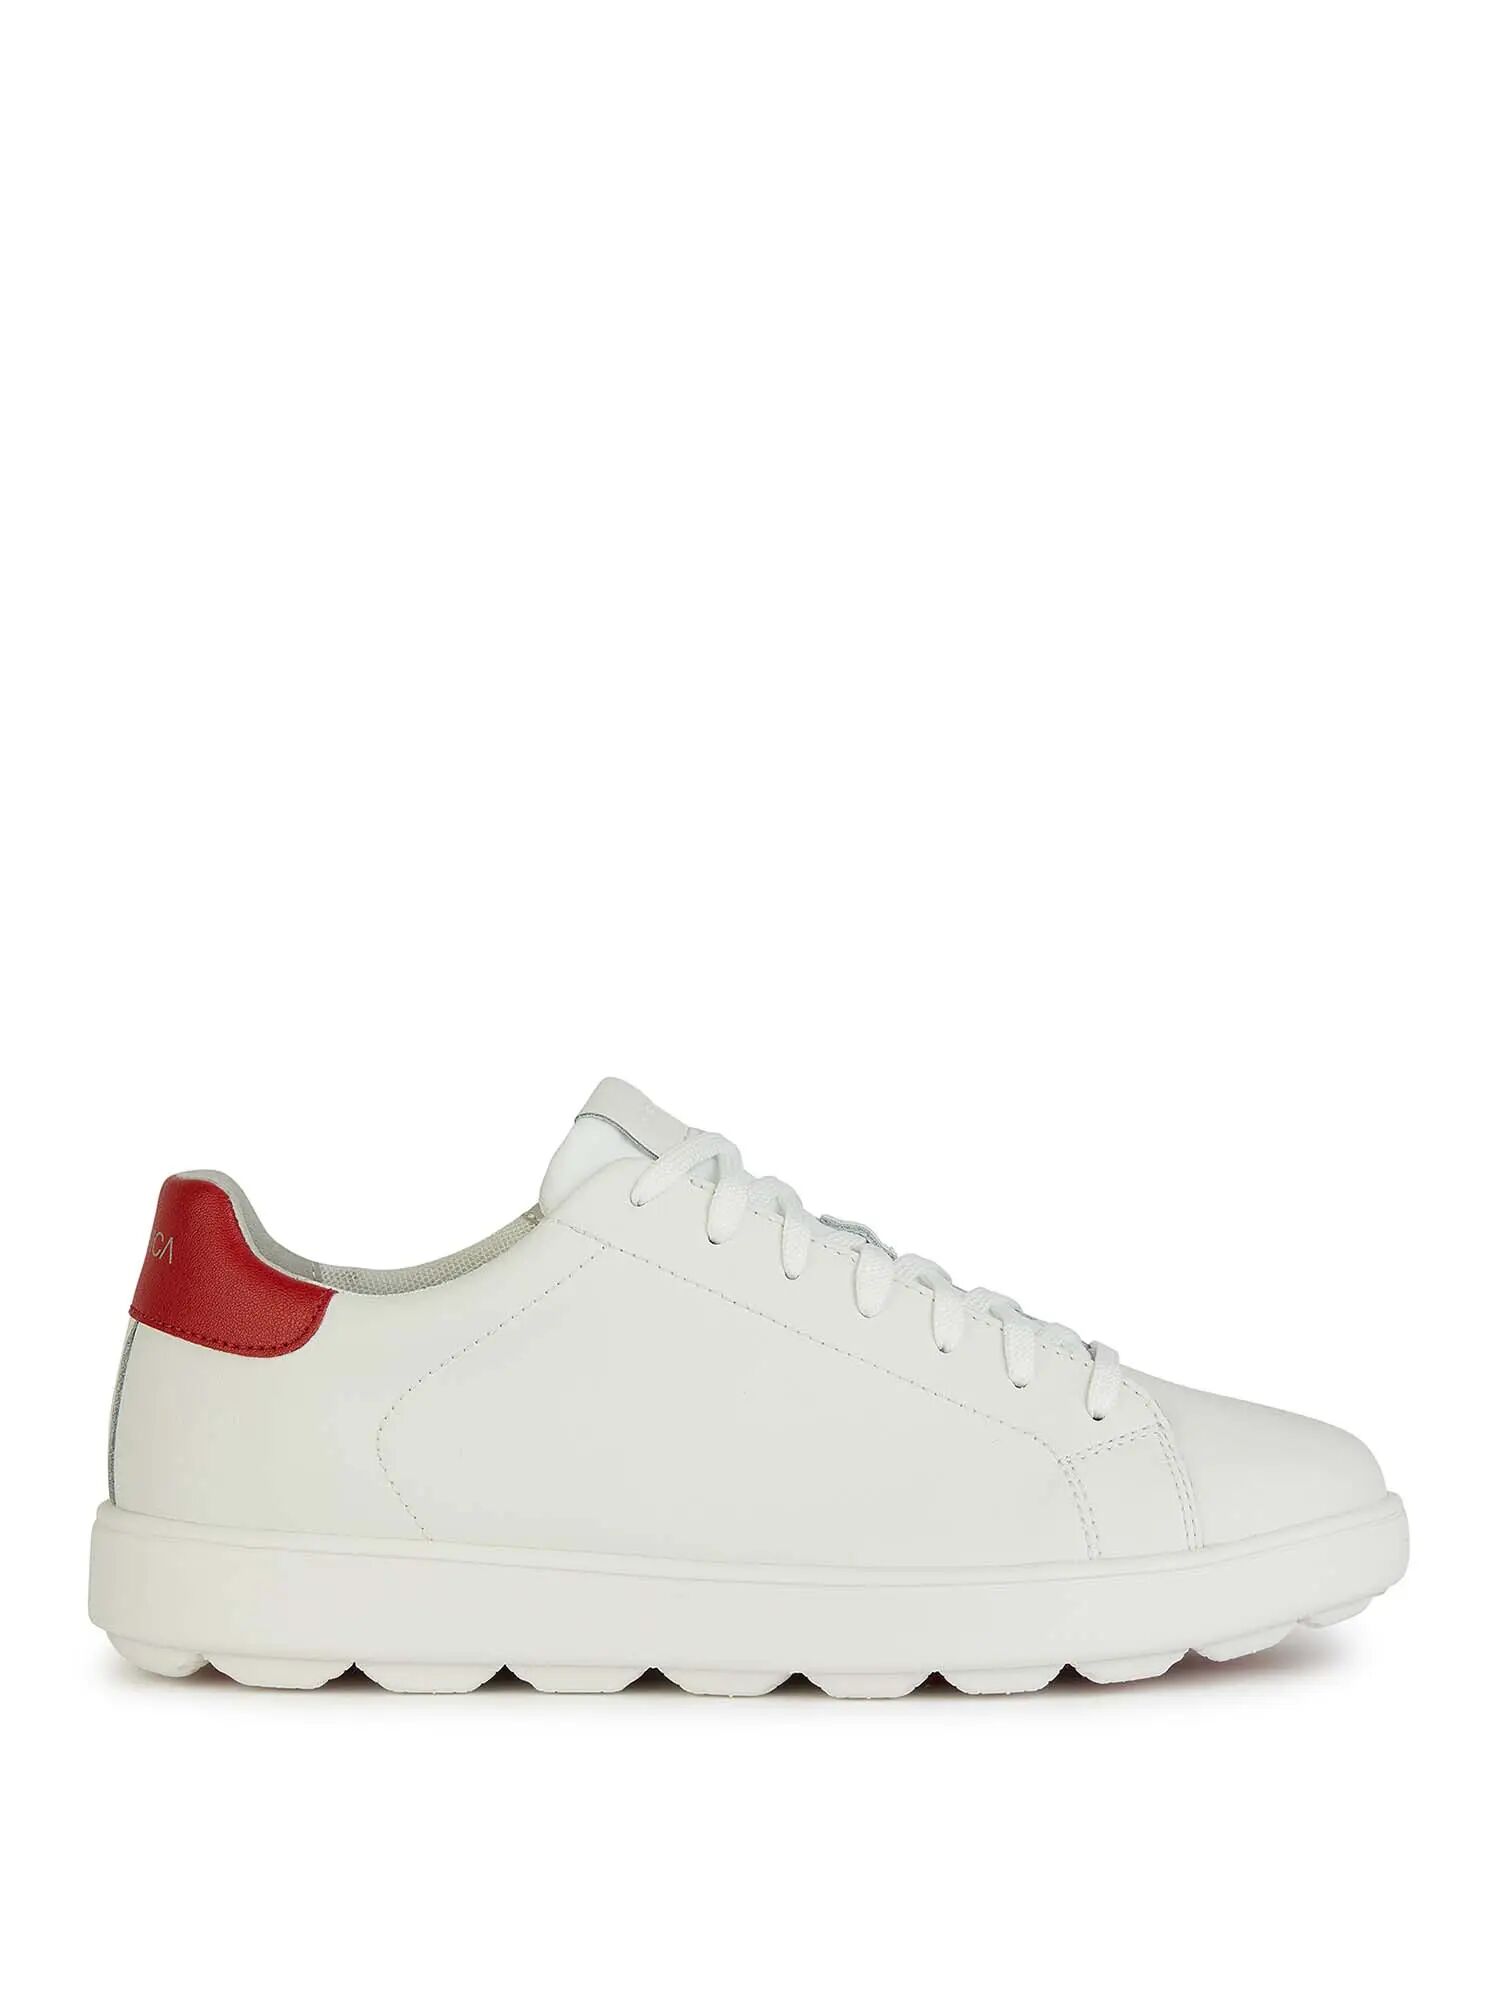 Geox Sneakers Bianche Uomo BIANCO/ROSSO 40